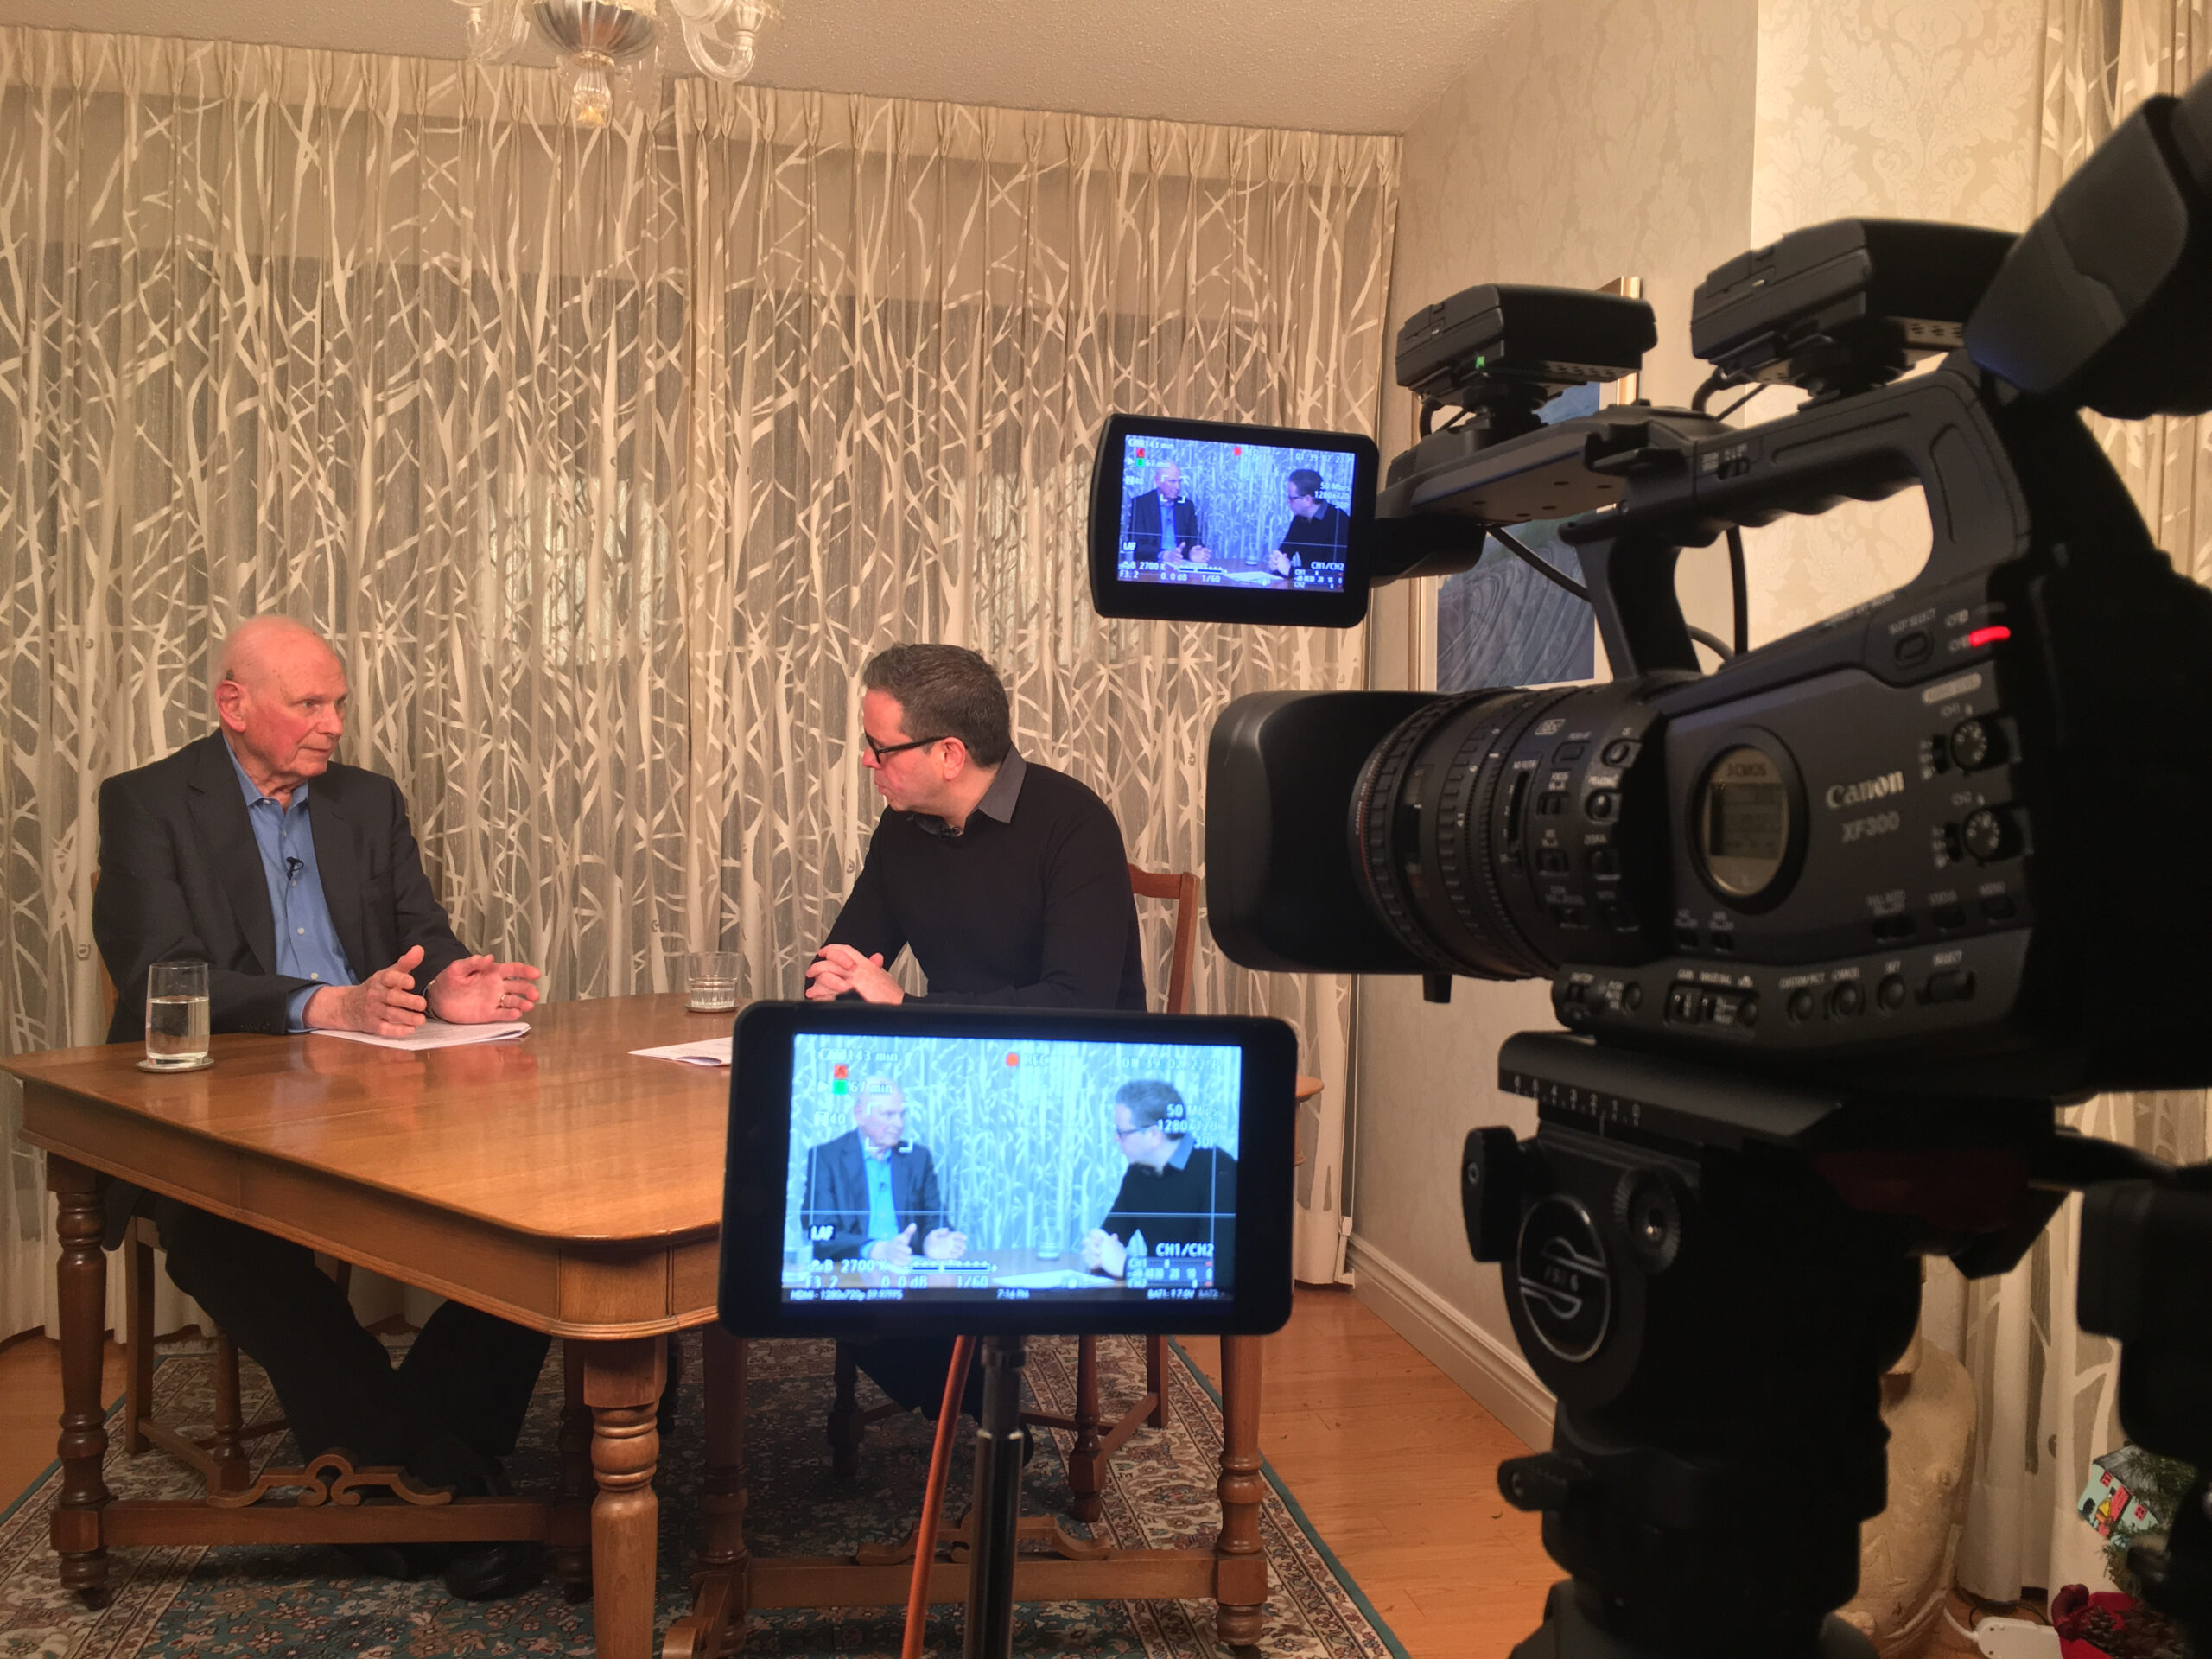 Paul Hellyer interview on site video production in Markham.